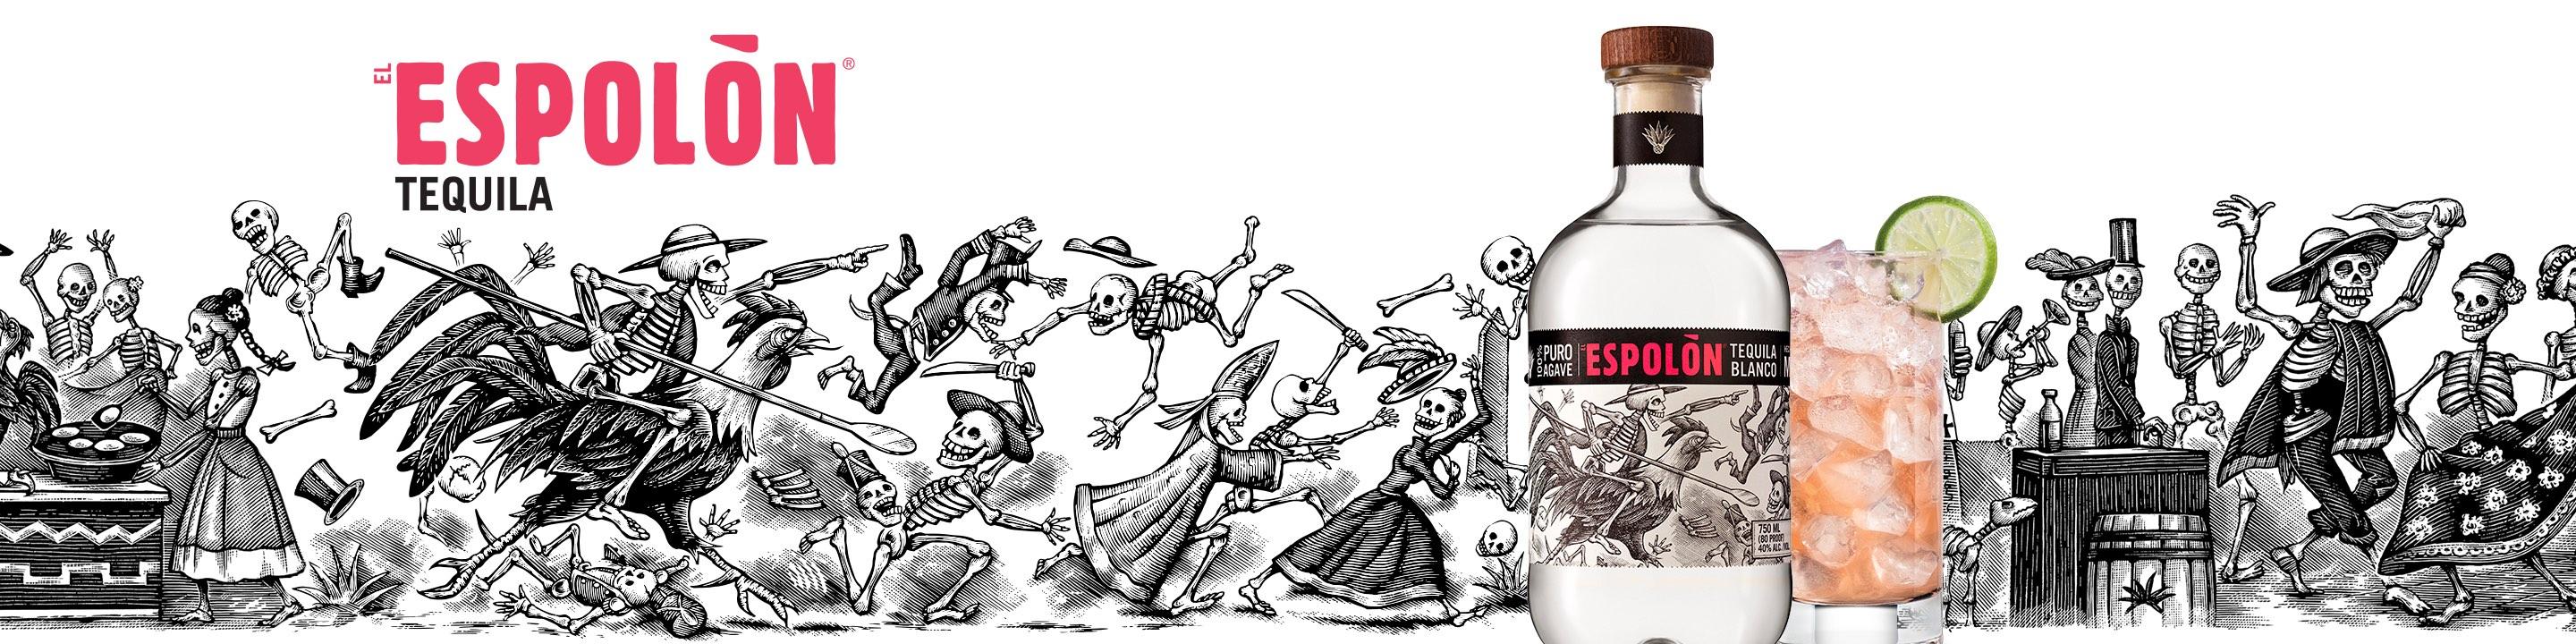 Made with hand-harvested 100% blue weber agave and distilled in the highlands of Jalisco, Mexico, Espolòn is the premium tequila that celebrates the storied culture of true Mexico through classic 19th century artistry and the iconic rooster, a symbol of national pride. The labels, unique illustrations inspired by Mexican artistry, infuse the characters of Guadalupe, Rosarita and Ramon the Rooster into journeys capturing real moments in Mexican history. Espolòn Tequila is produced in three marques, Blanco, Reposado and Anejo, and offers a limited time release, extra Anejo. Buy Espolòn Tequila online now from nearby liquor stores via Minibar Delivery.